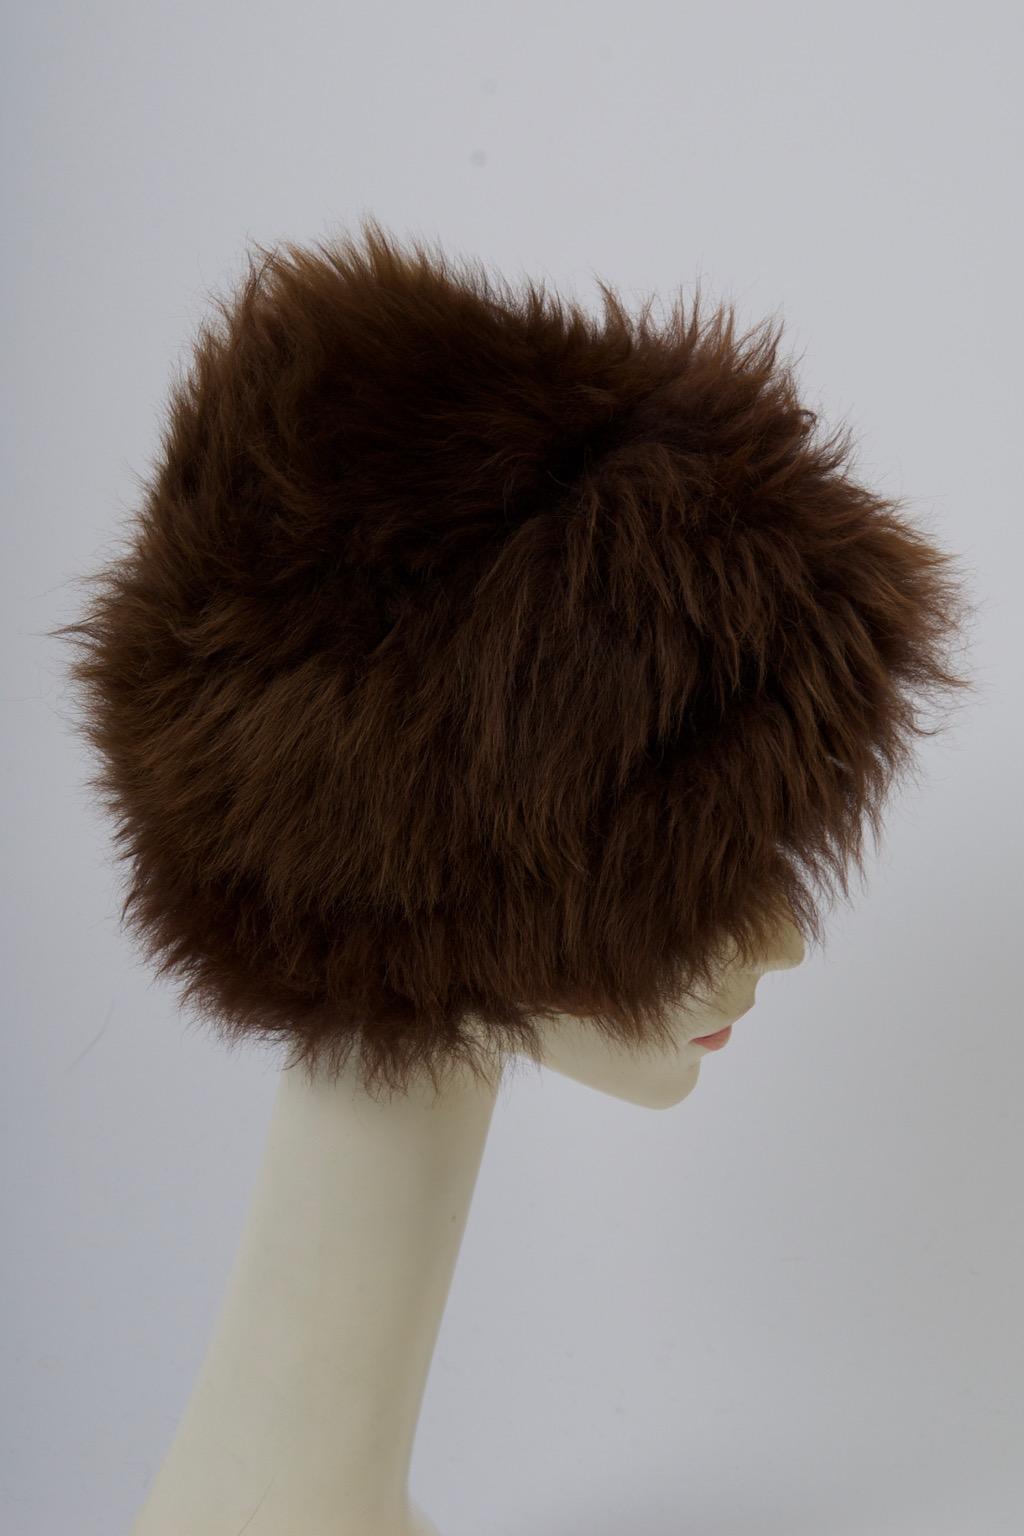 Vintage Lamb Hat In Good Condition For Sale In Alford, MA